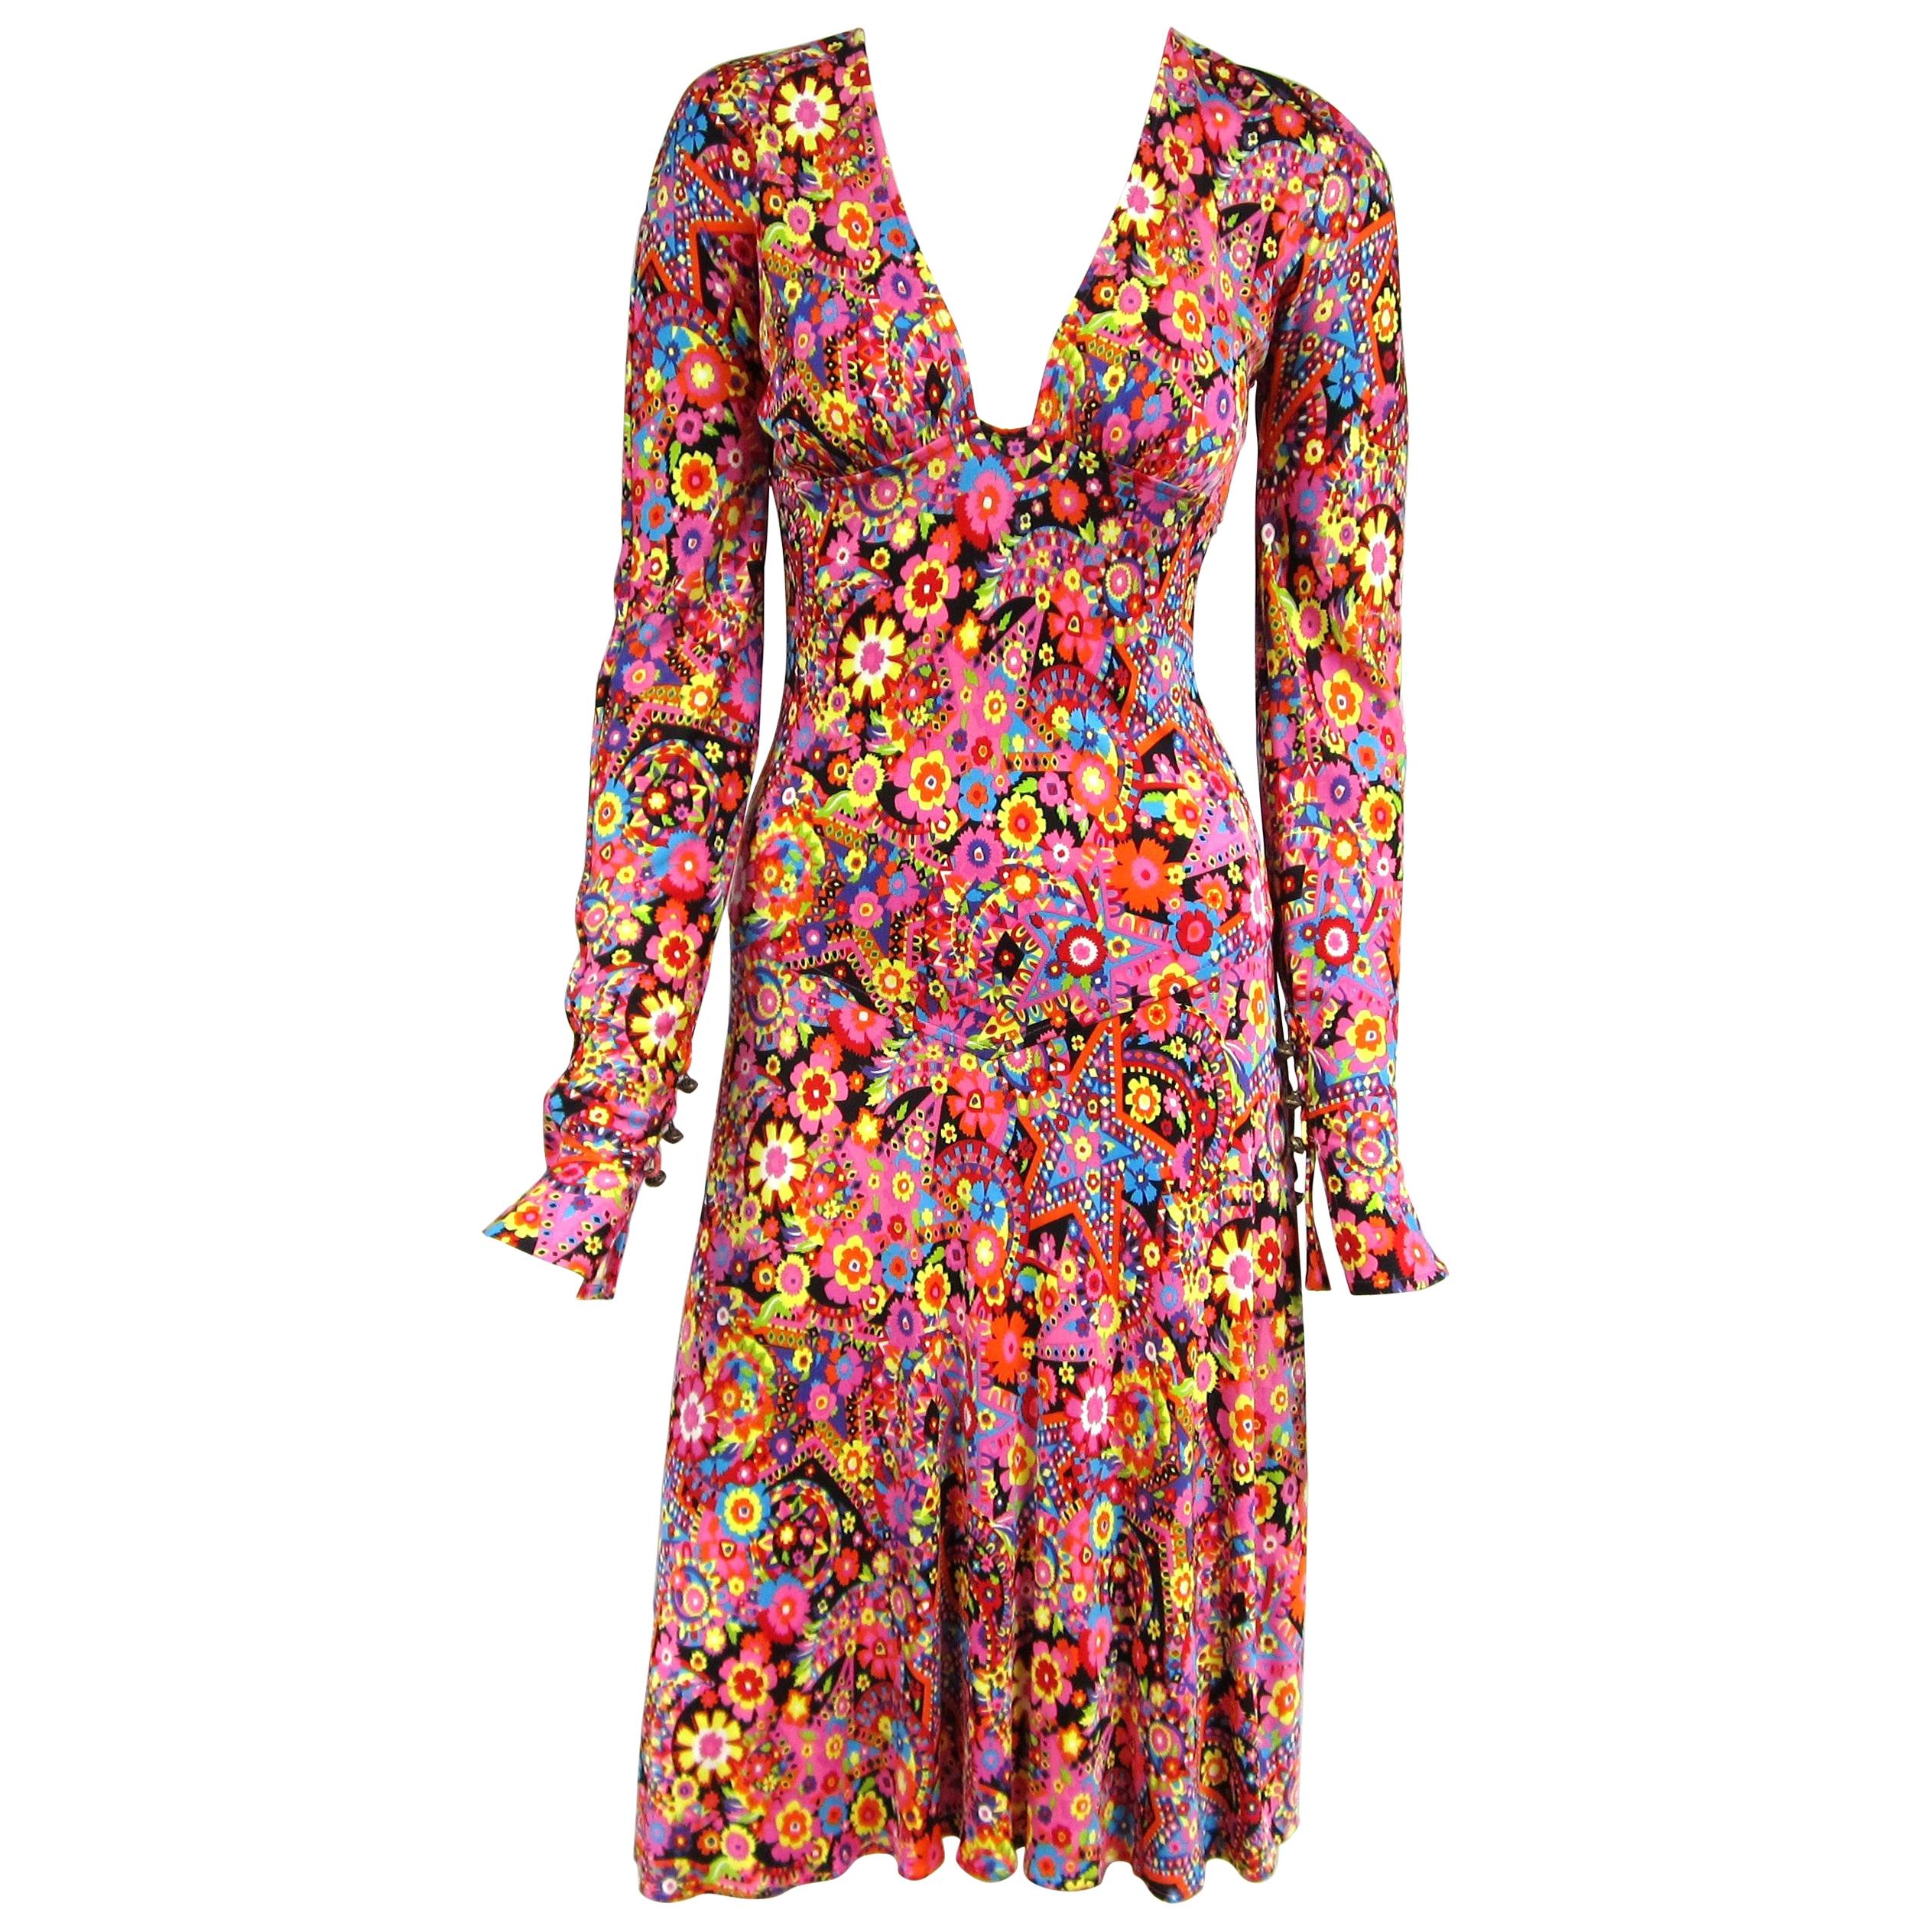 Gianni Versace Couture Floral Abstract Dress 2002 For Sale